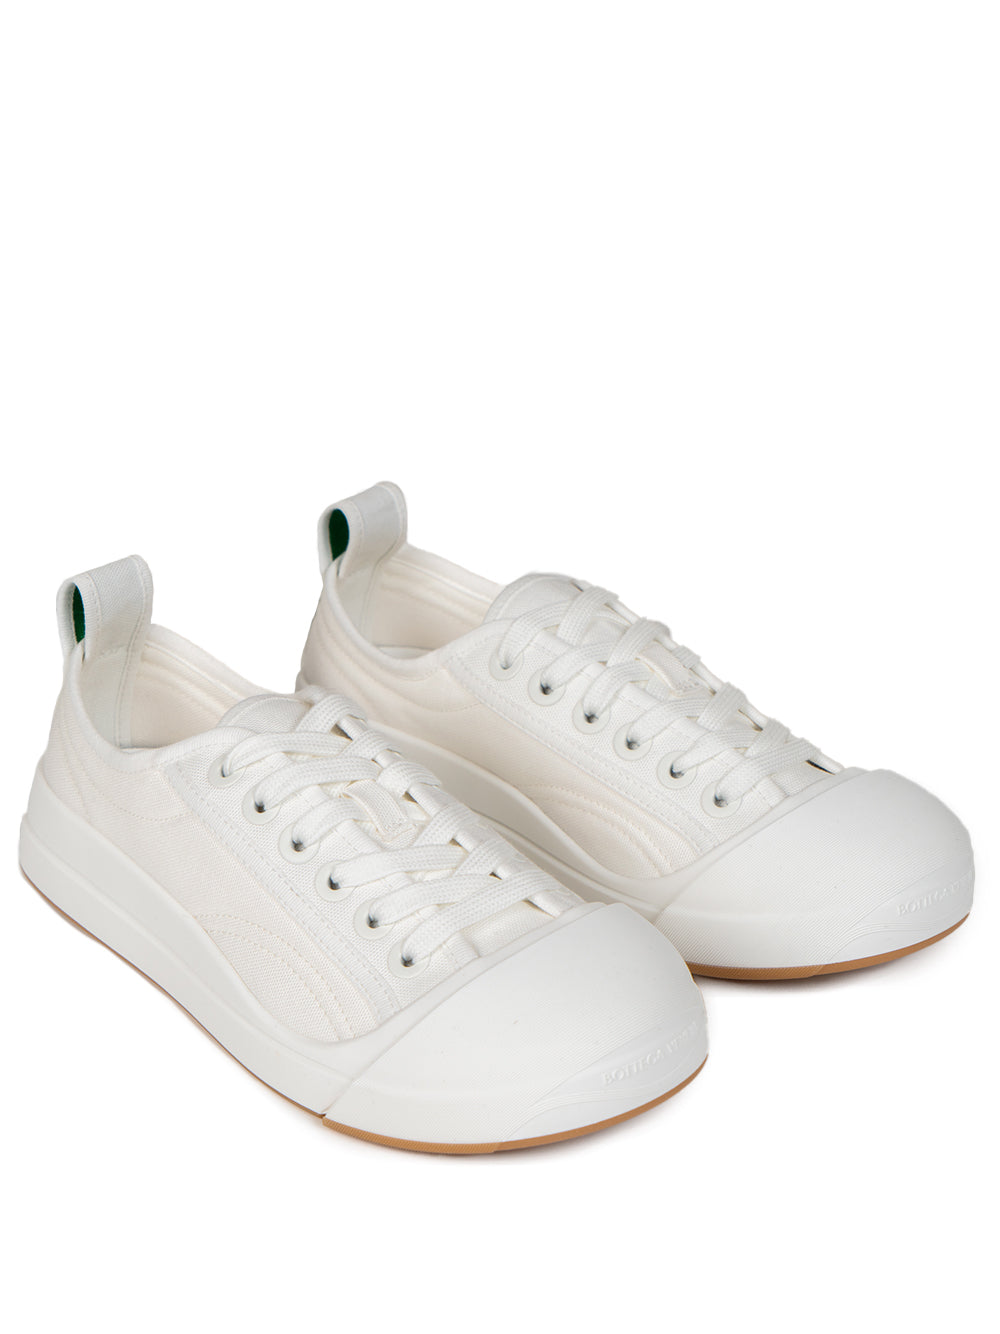 White canvas sneakers